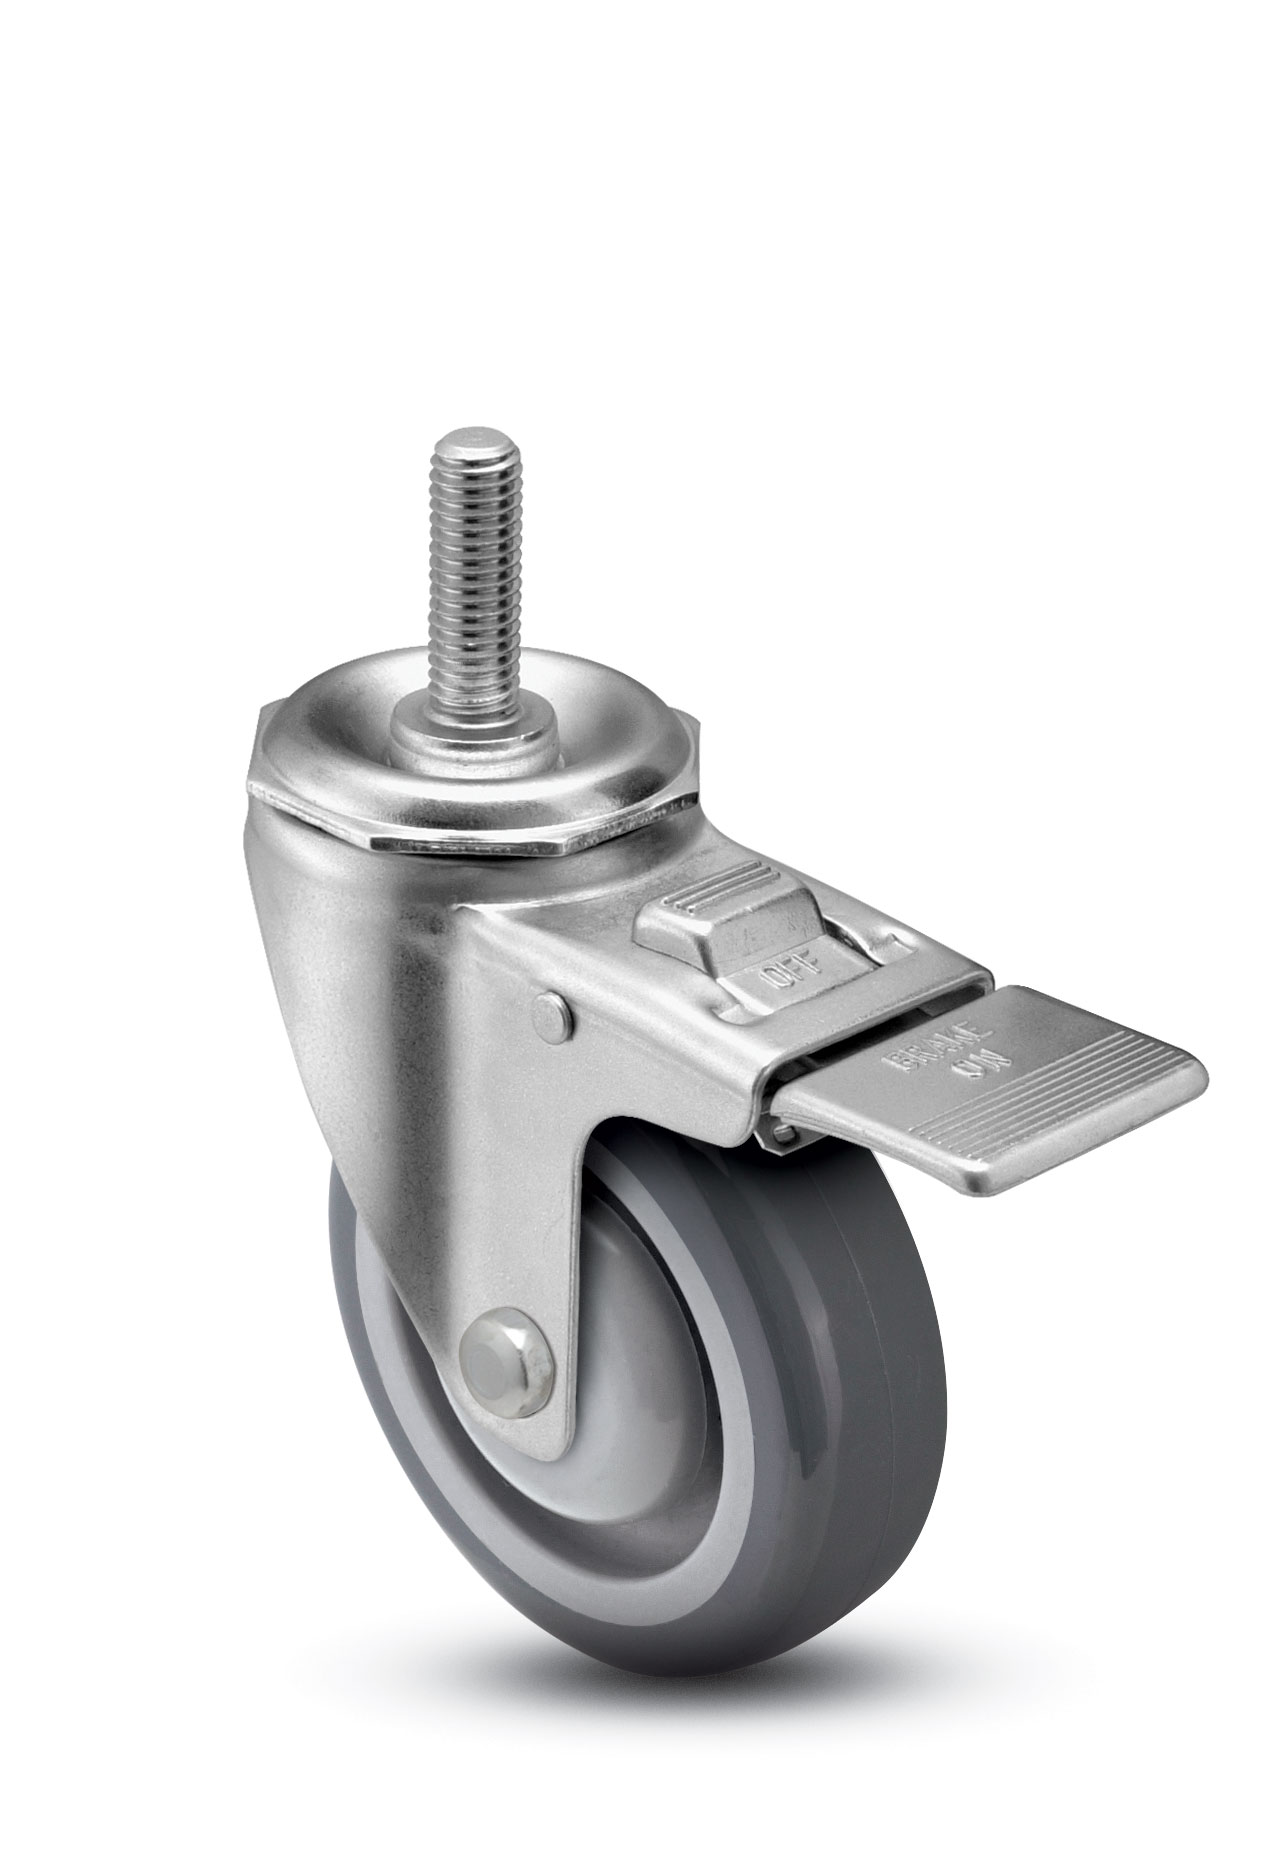 Caster; Swivel; 3" x 1-1/4"; Thermoplastized Rubber (Gray); Threaded Stem (1/2"-13TPI x 1-1/2"); Precision Ball Bearings; 250#; Dust Cover (Mtl); Total Lock (Item #63244)